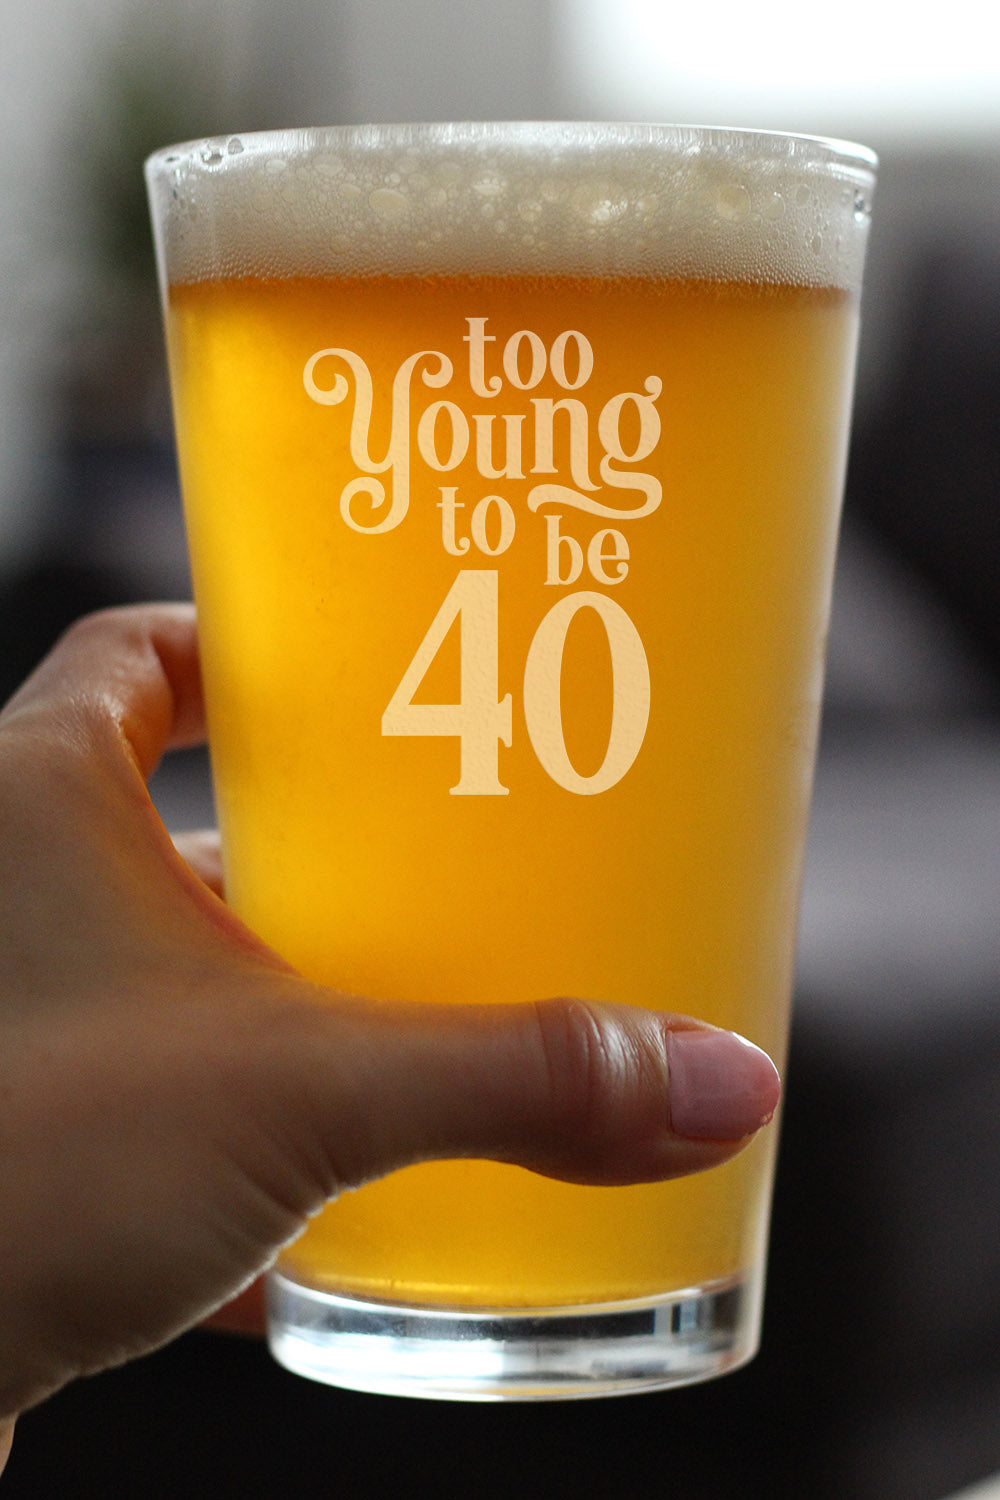 Too Young to Be 40 - Funny 16 oz Pint Glass for Beer - 40th Birthday Gifts for Men or Women Turning 40 - Bday Party Decor